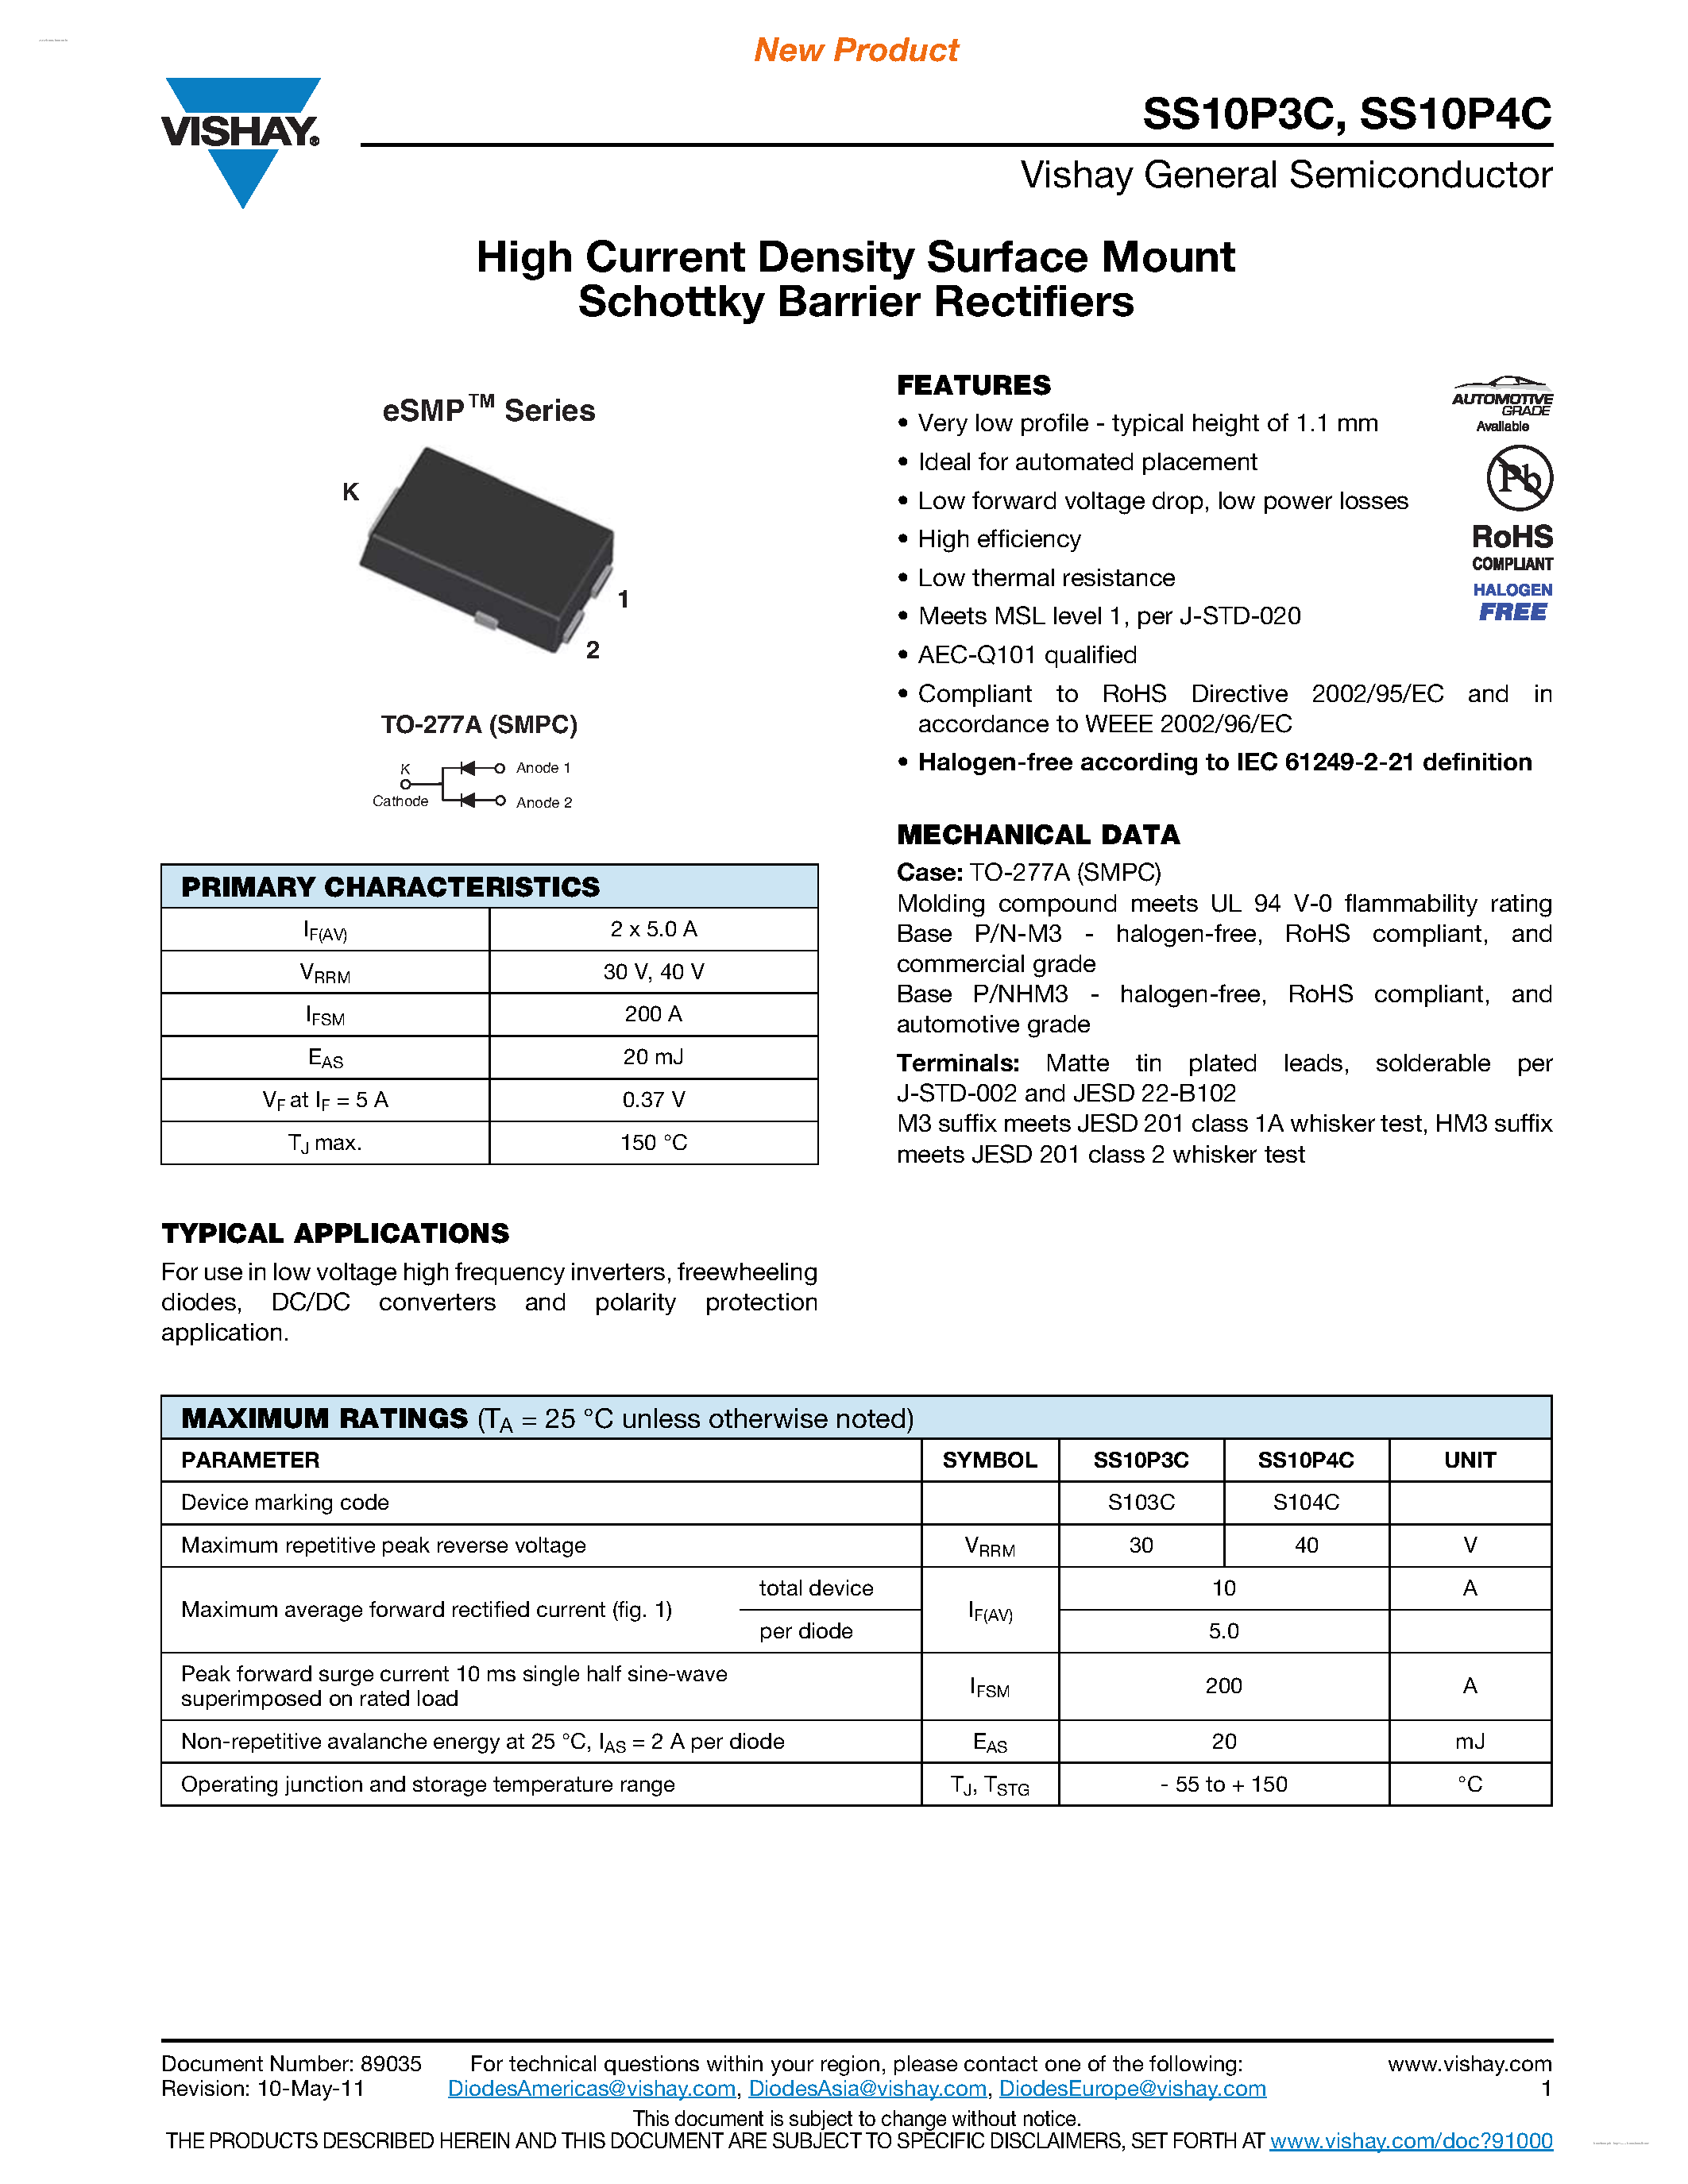 Datasheet SS10P3C - (SS10P3C / SS10P4C) High Current Density Surface Mount Schottky Barrier Rectifiers page 1